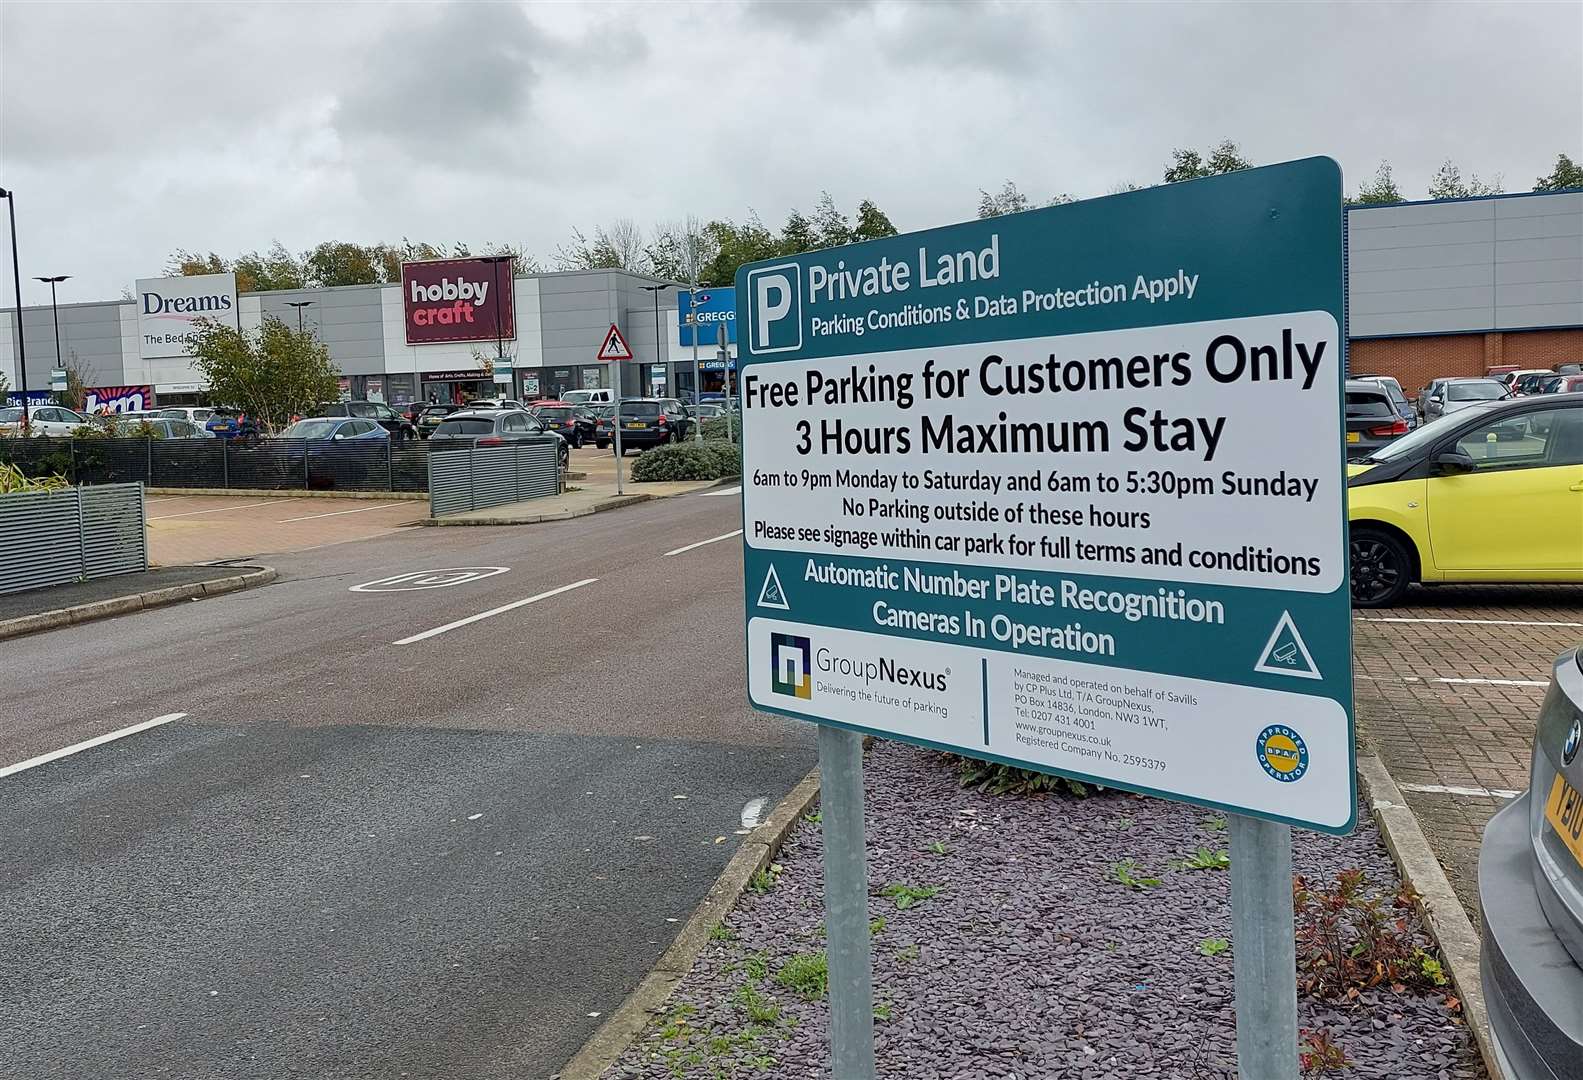 The parking rules at the retail park have now changed